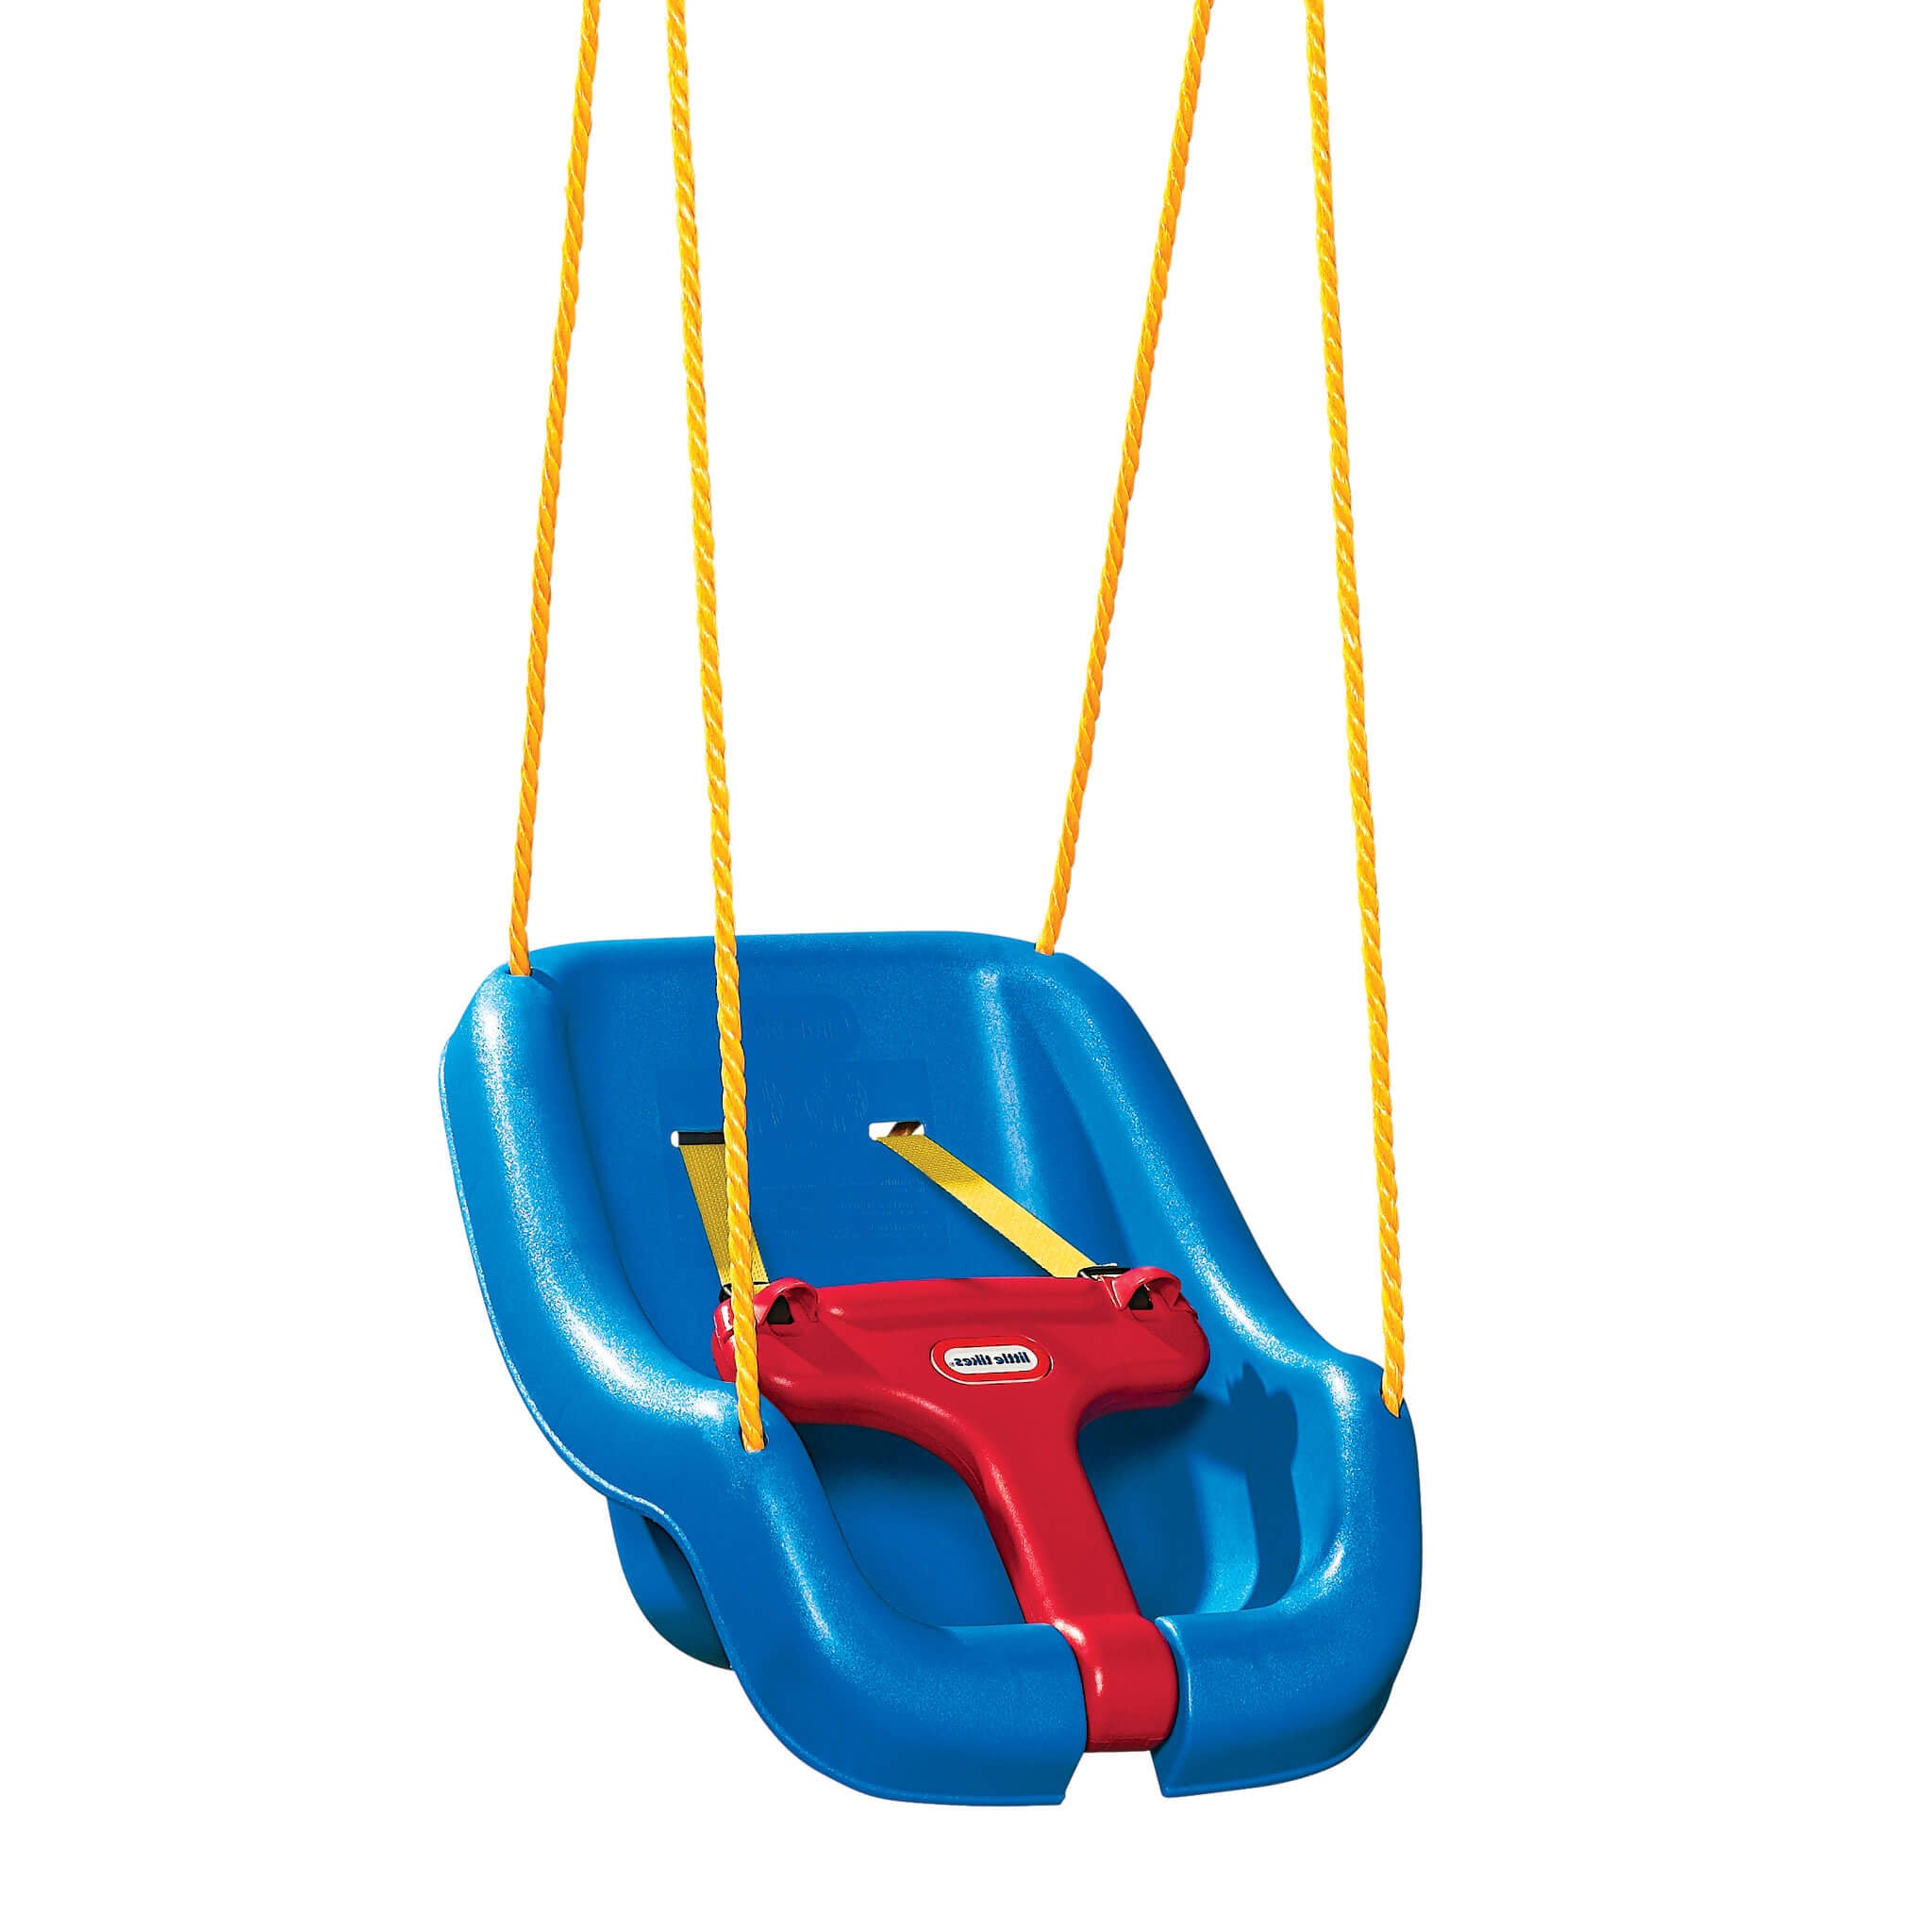 Infant to Toddler Swing™ - Teal